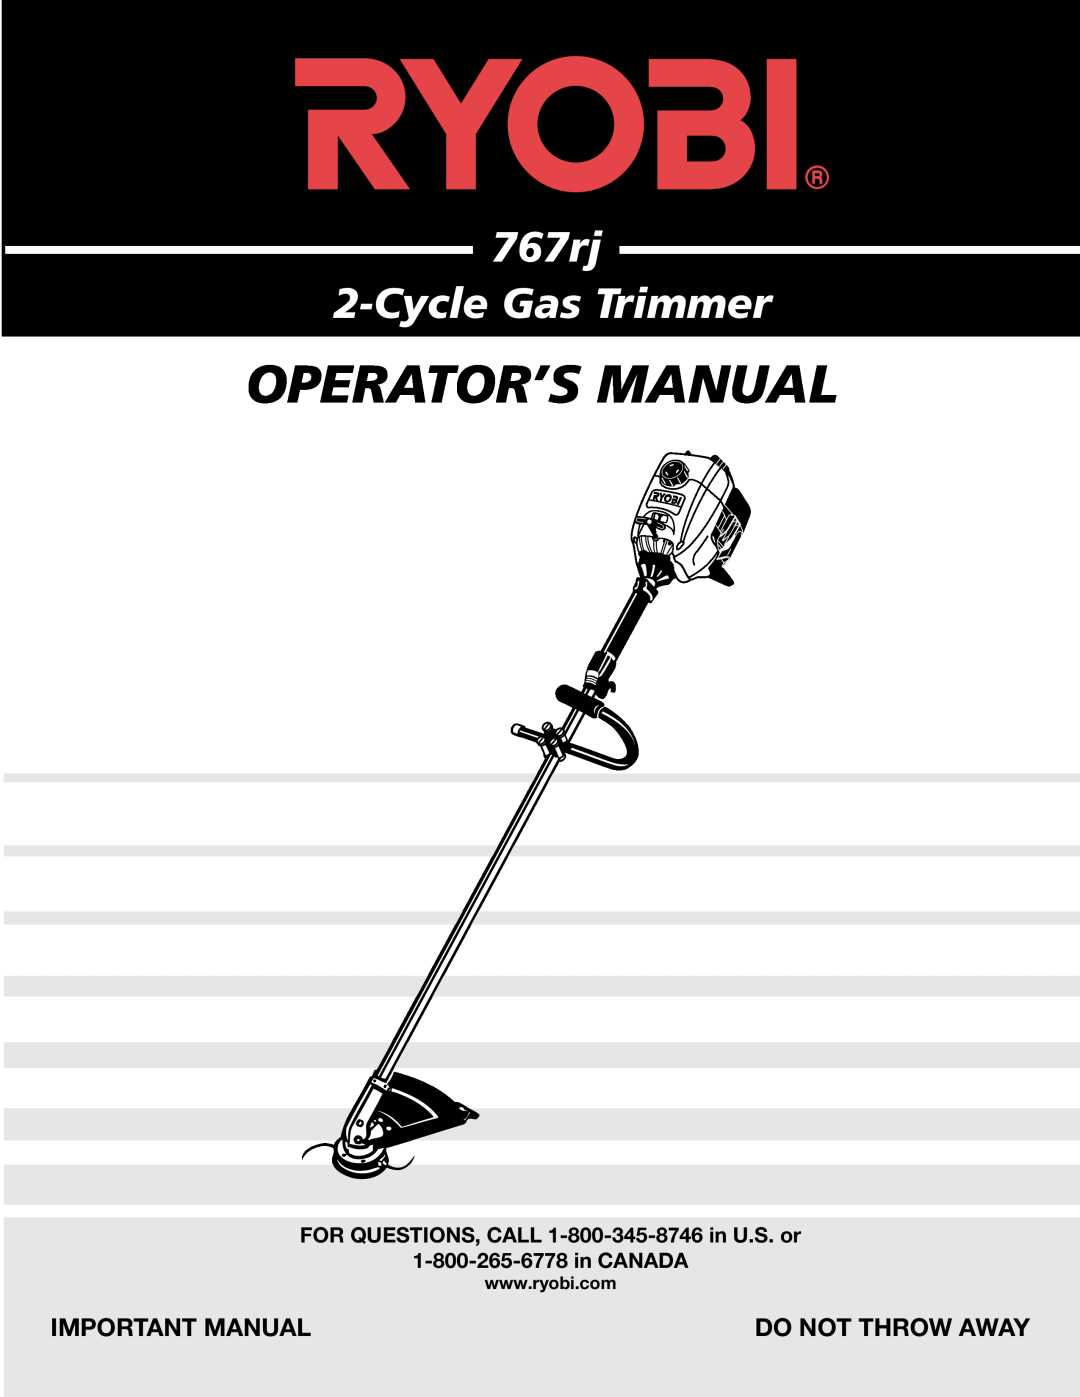 Ryobi 767rj manual Important Manual, FOR QUESTIONS, CALL 1-800-345-8746in U.S. or, 1-800-265-6778in CANADA 